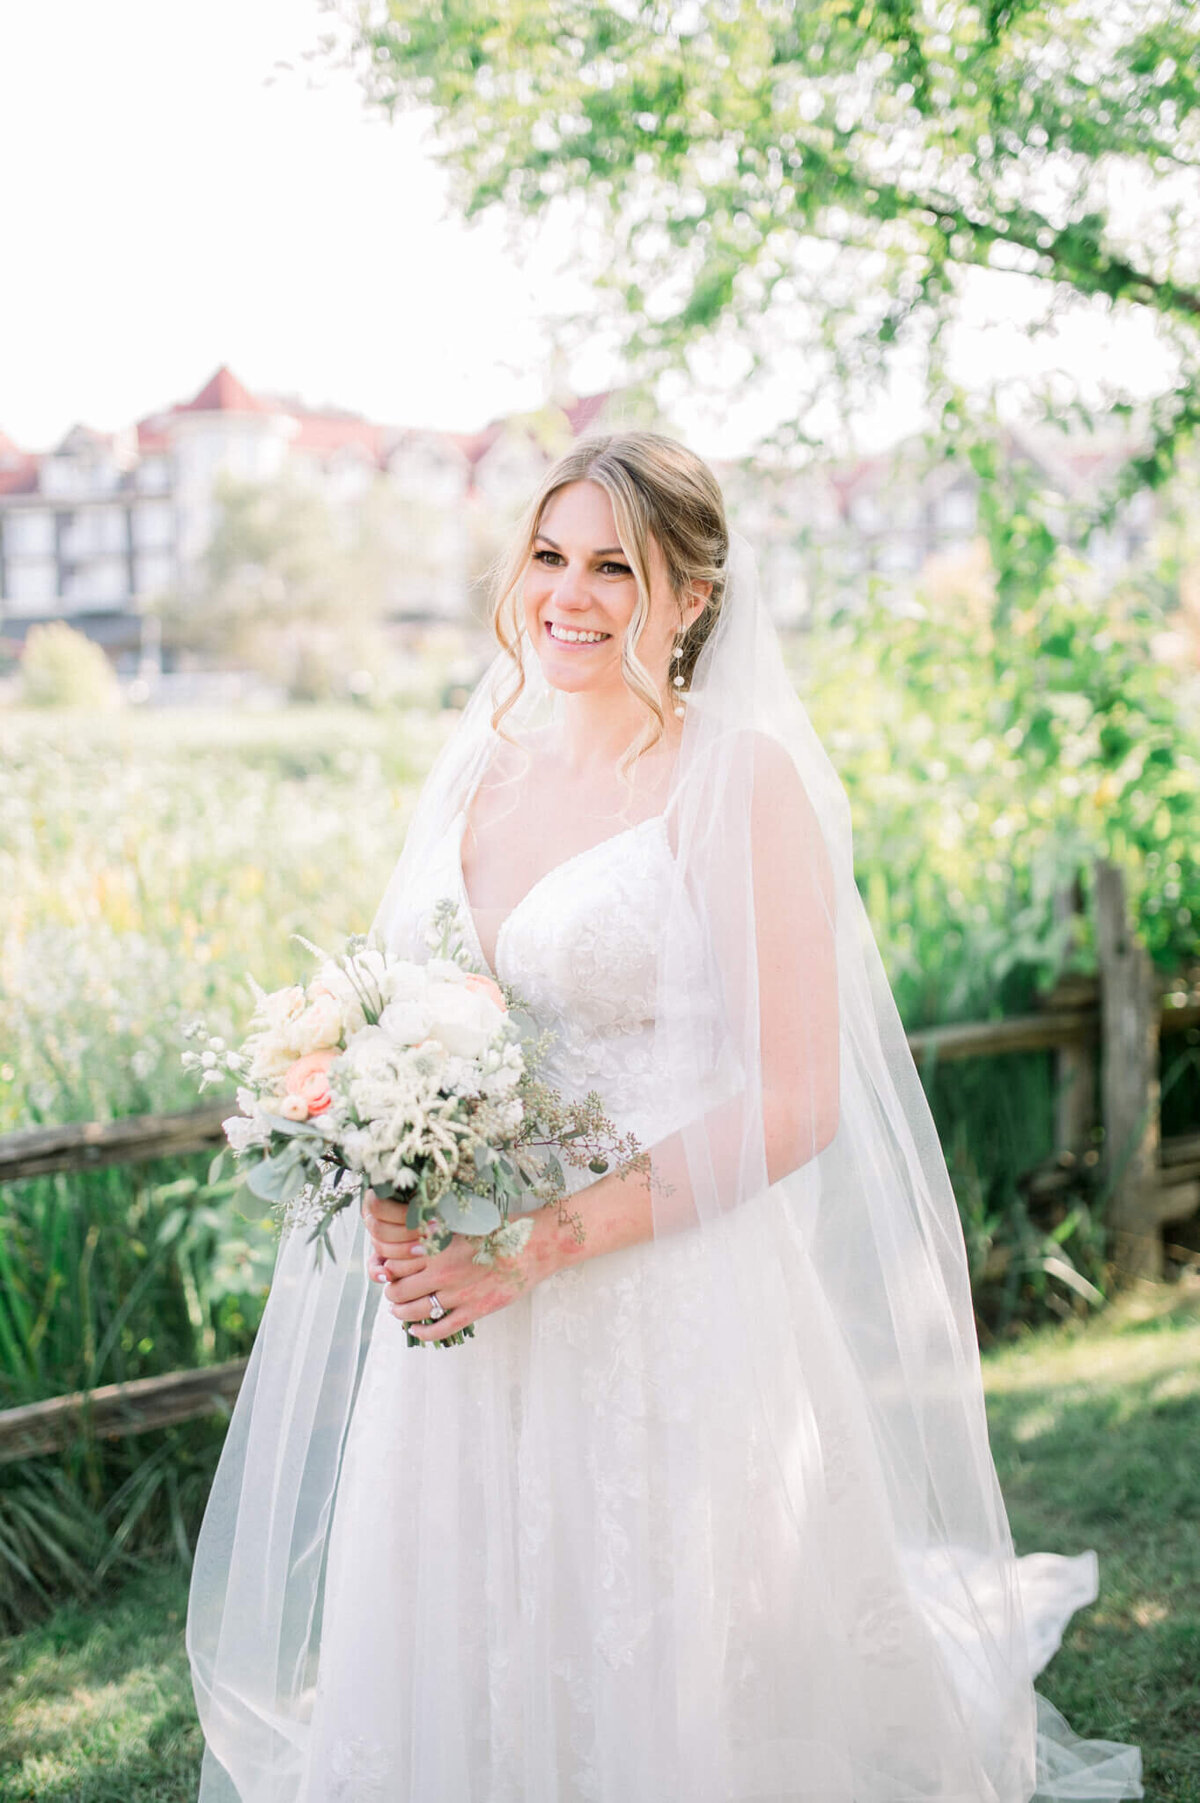 Brides portrait while holding flowers at her Toronto wedding